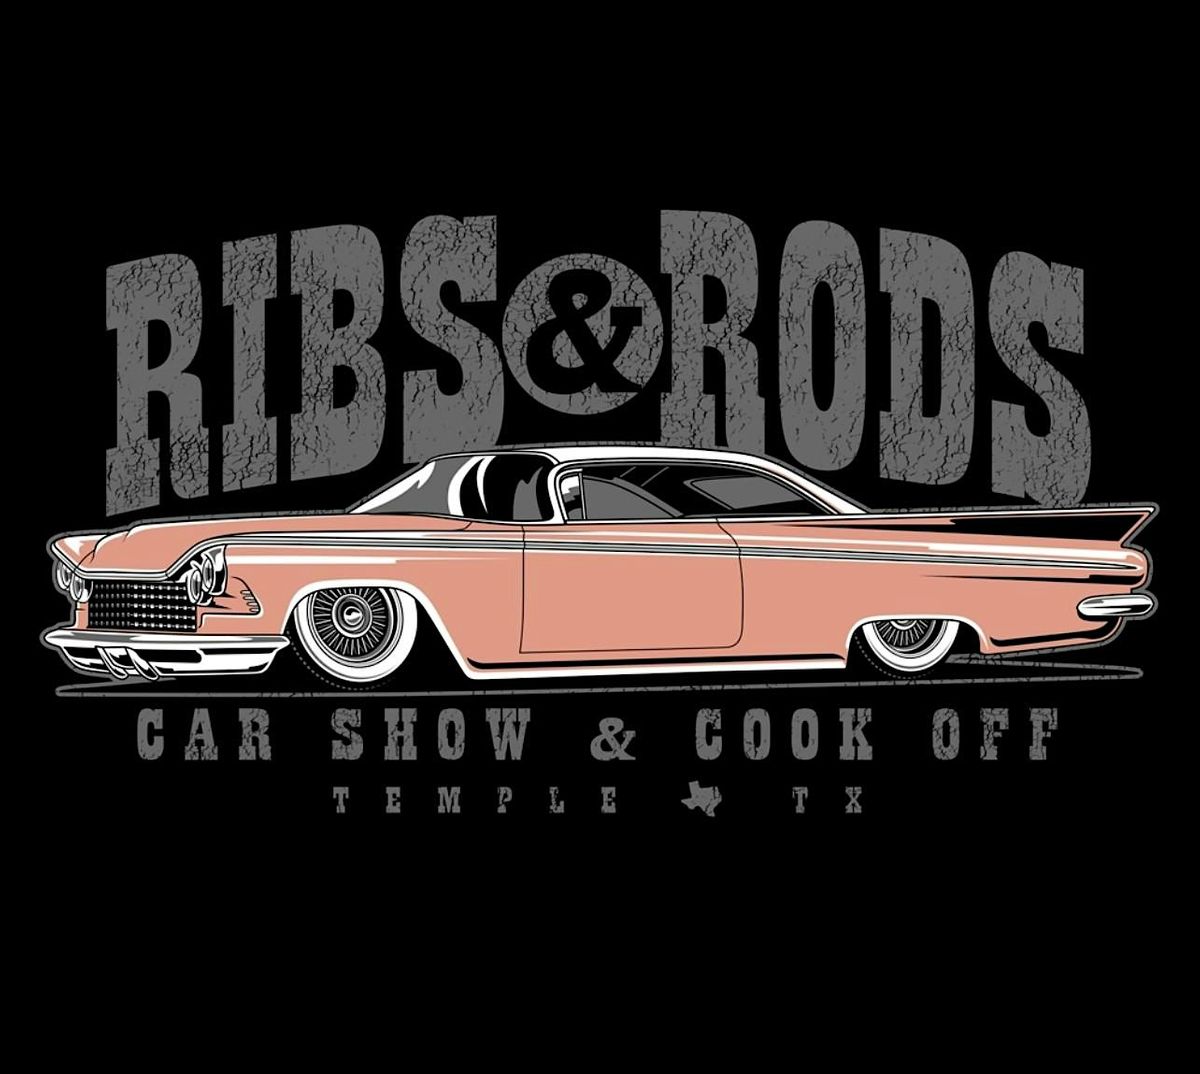 Ribs & Rods 2024 - Presented by Don Ringler Chevrolet and Toyota